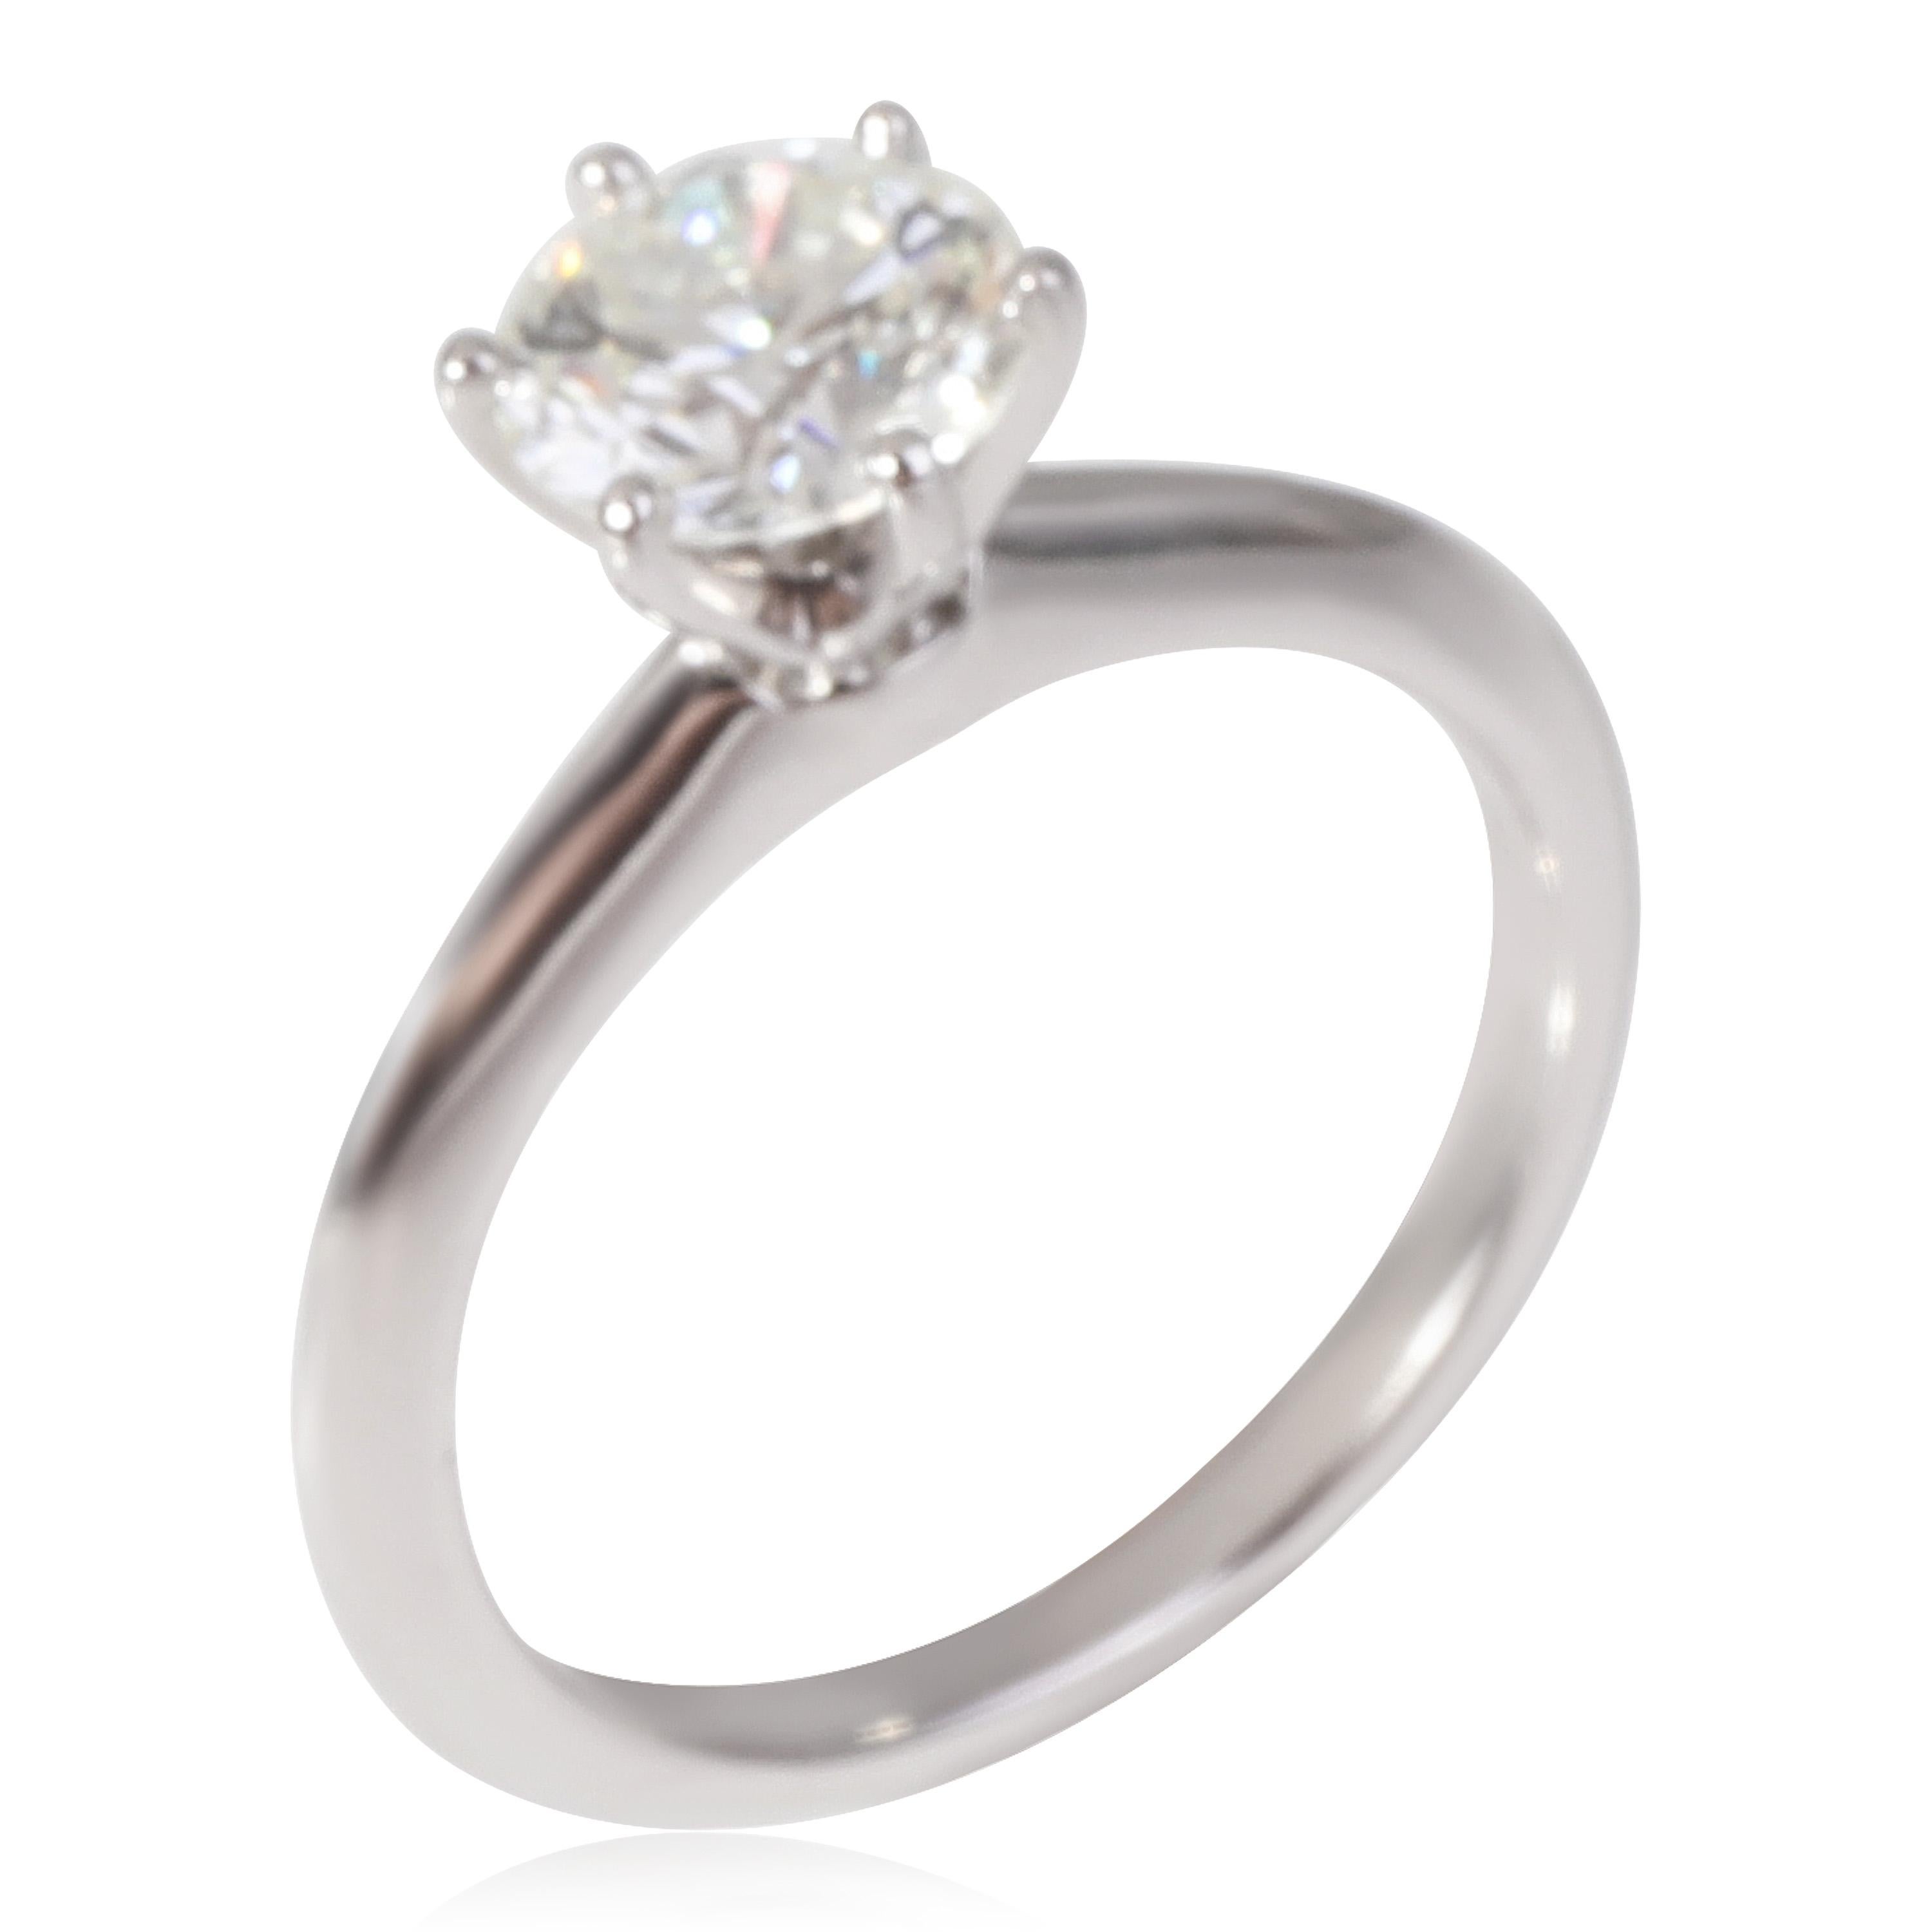 Tiffany & Co. Diamond Engagement Ring in Platinum (0.94 ct I/VVS1)

PRIMARY DETAILS
SKU: 120173
Listing Title: Tiffany & Co. Diamond Engagement Ring in Platinum (0.94 ct I/VVS1)
Condition Description: Retails for 11400 USD. In excellent condition